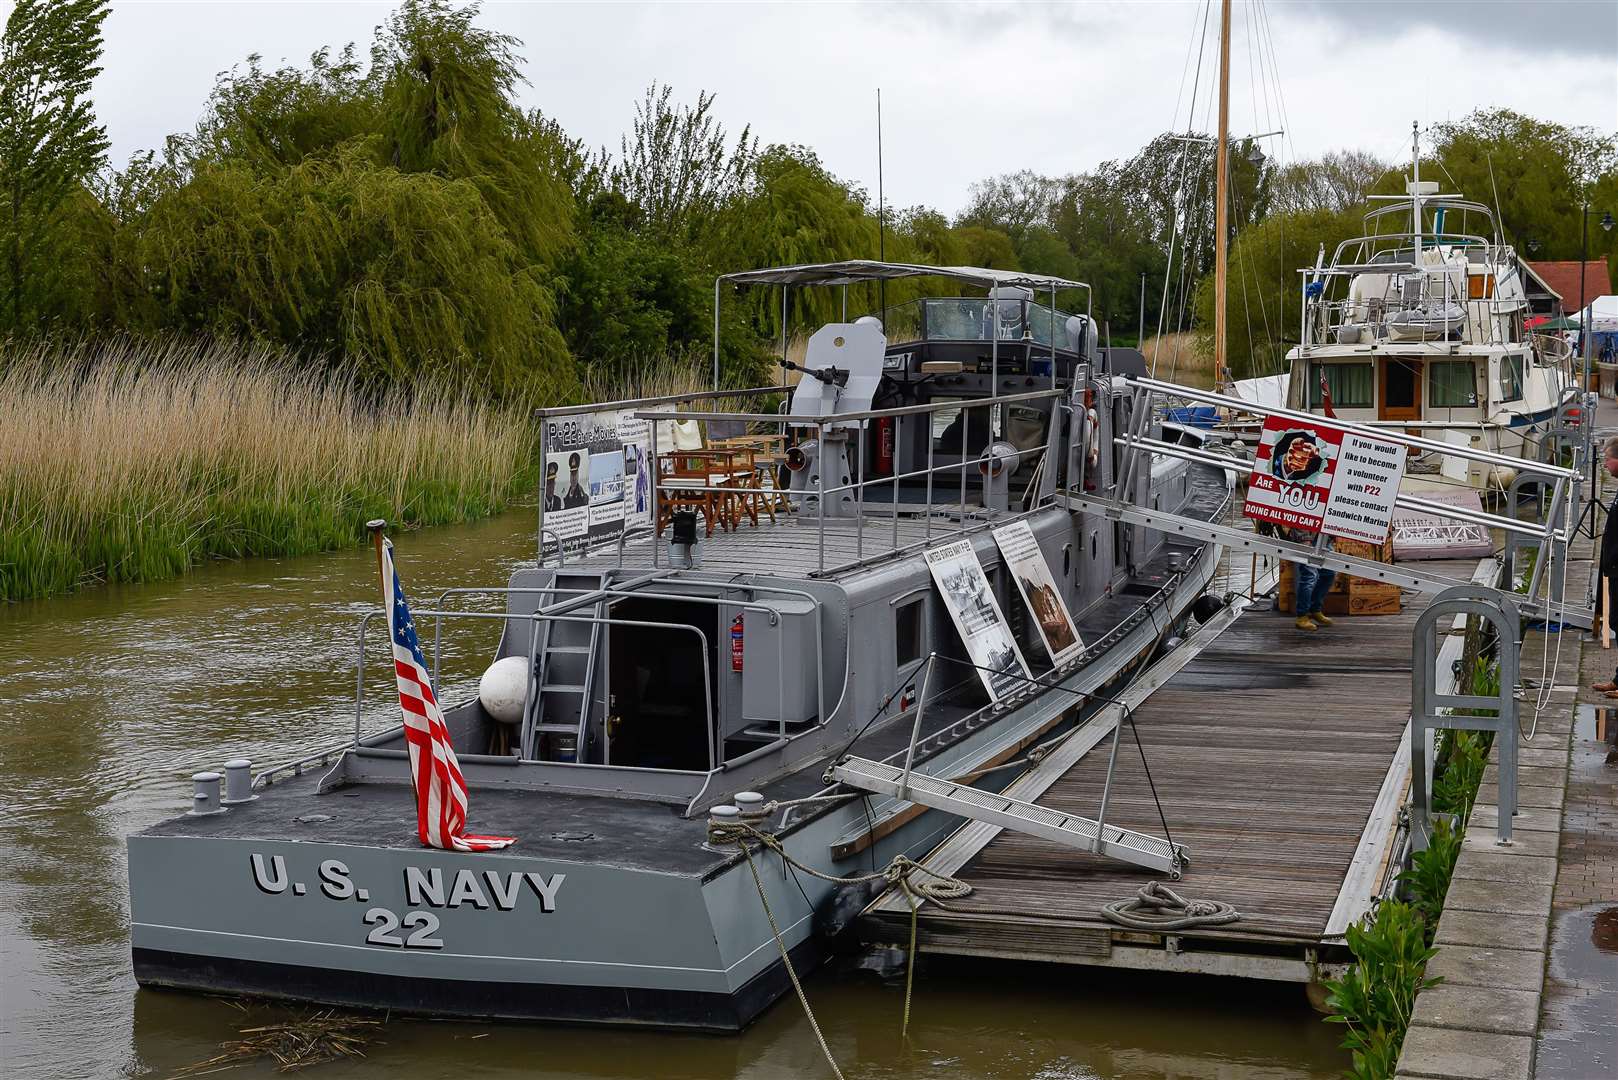 The P22 Gunboat on Sandwich Quay was used by the US Navy